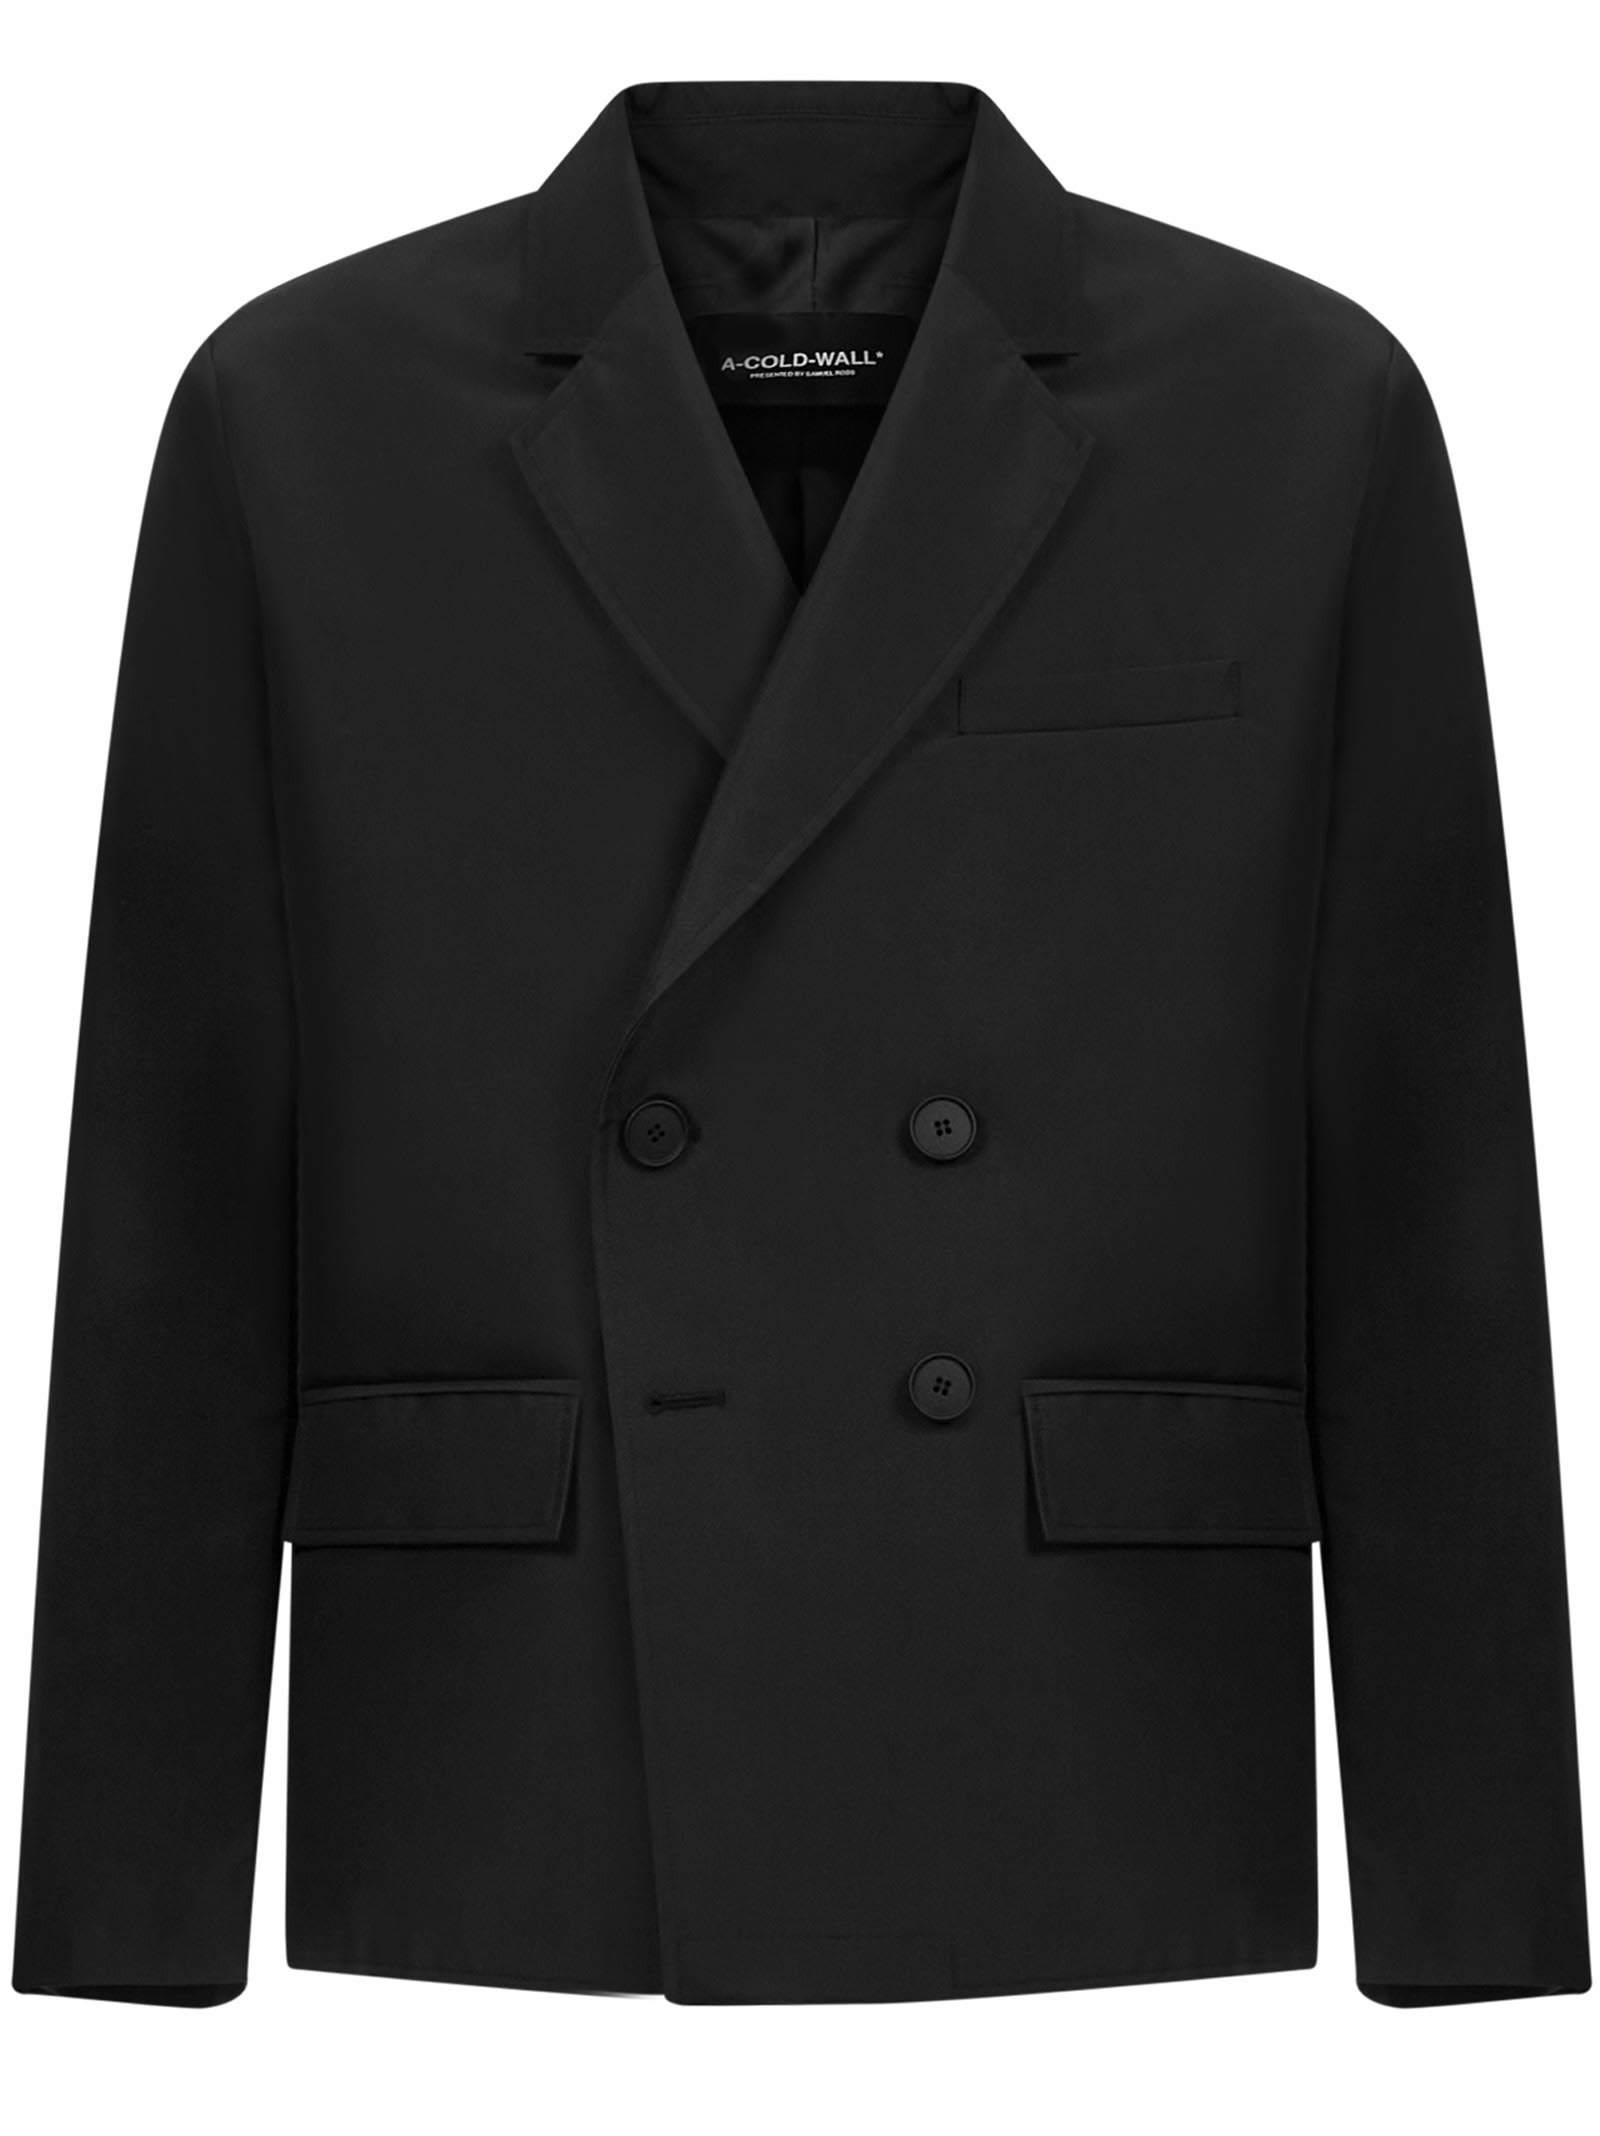 A-COLD-WALL A Cold Wall Blazer